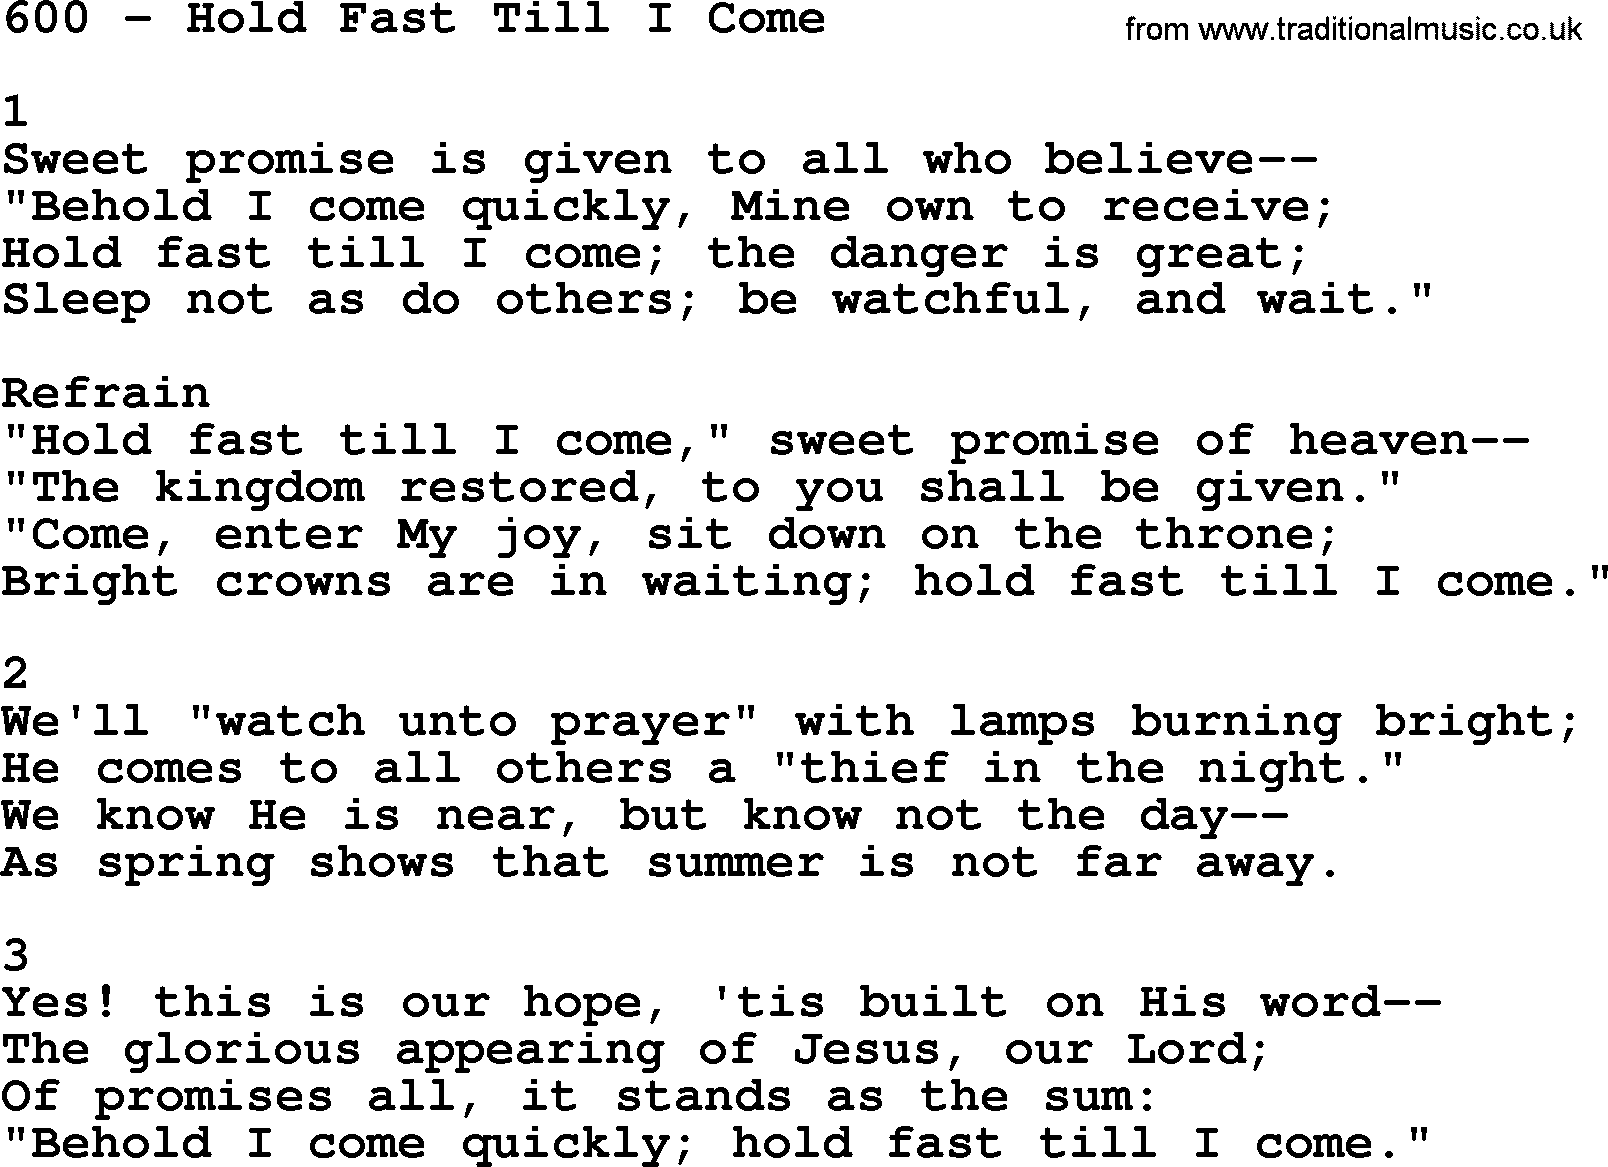 Complete Adventis Hymnal, title: 600-Hold Fast Till I Come, with lyrics, midi, mp3, powerpoints(PPT) and PDF,